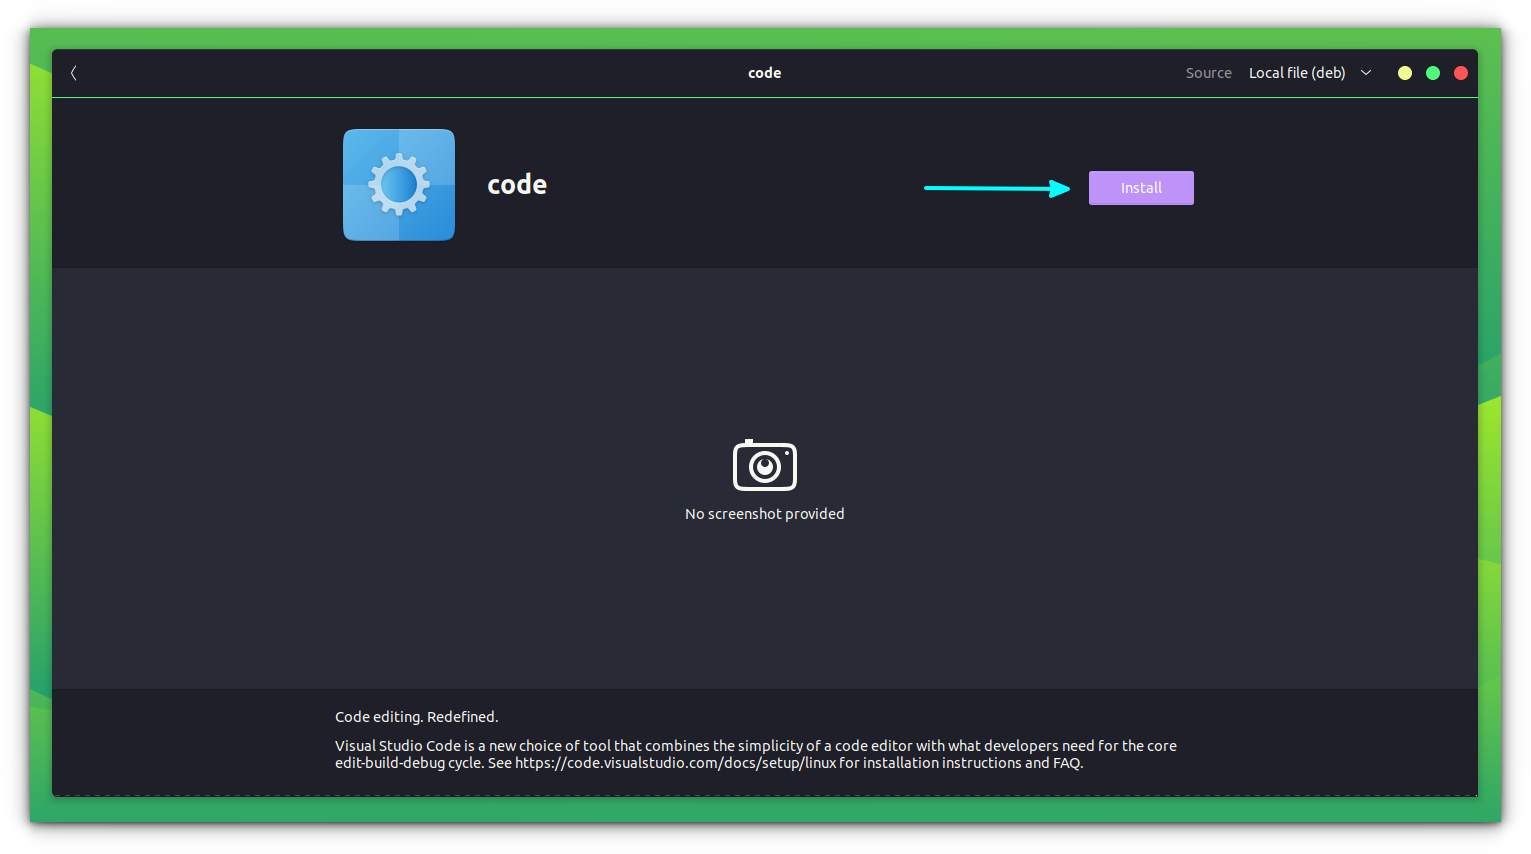 Click on "Install" button in Software Center to install the VS Code deb file